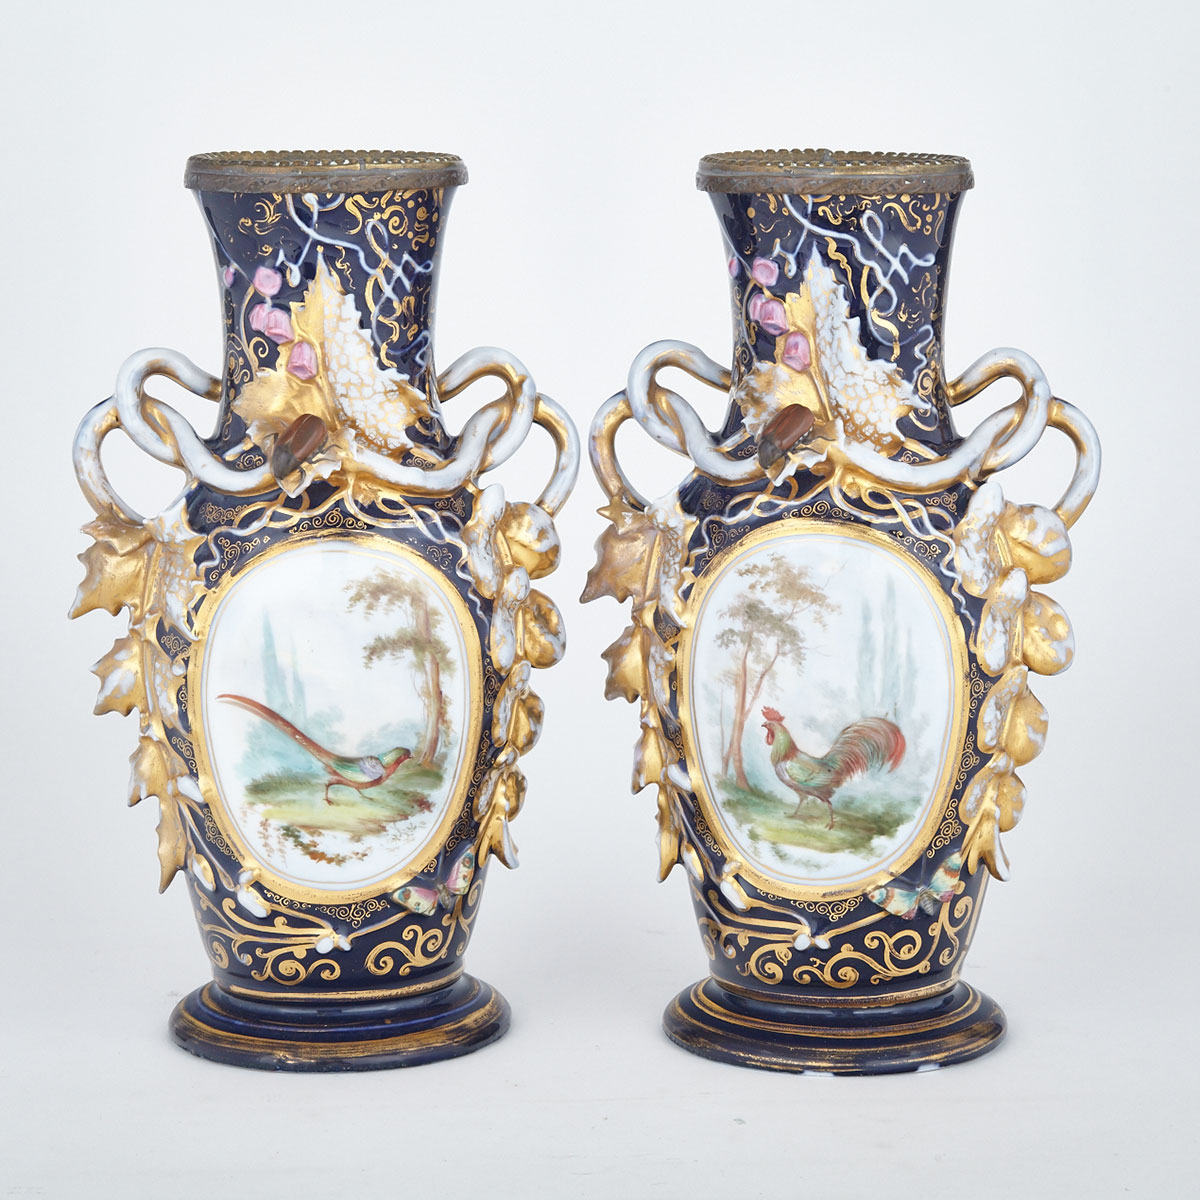 Pair of French Porcelain Vases, late 19th century